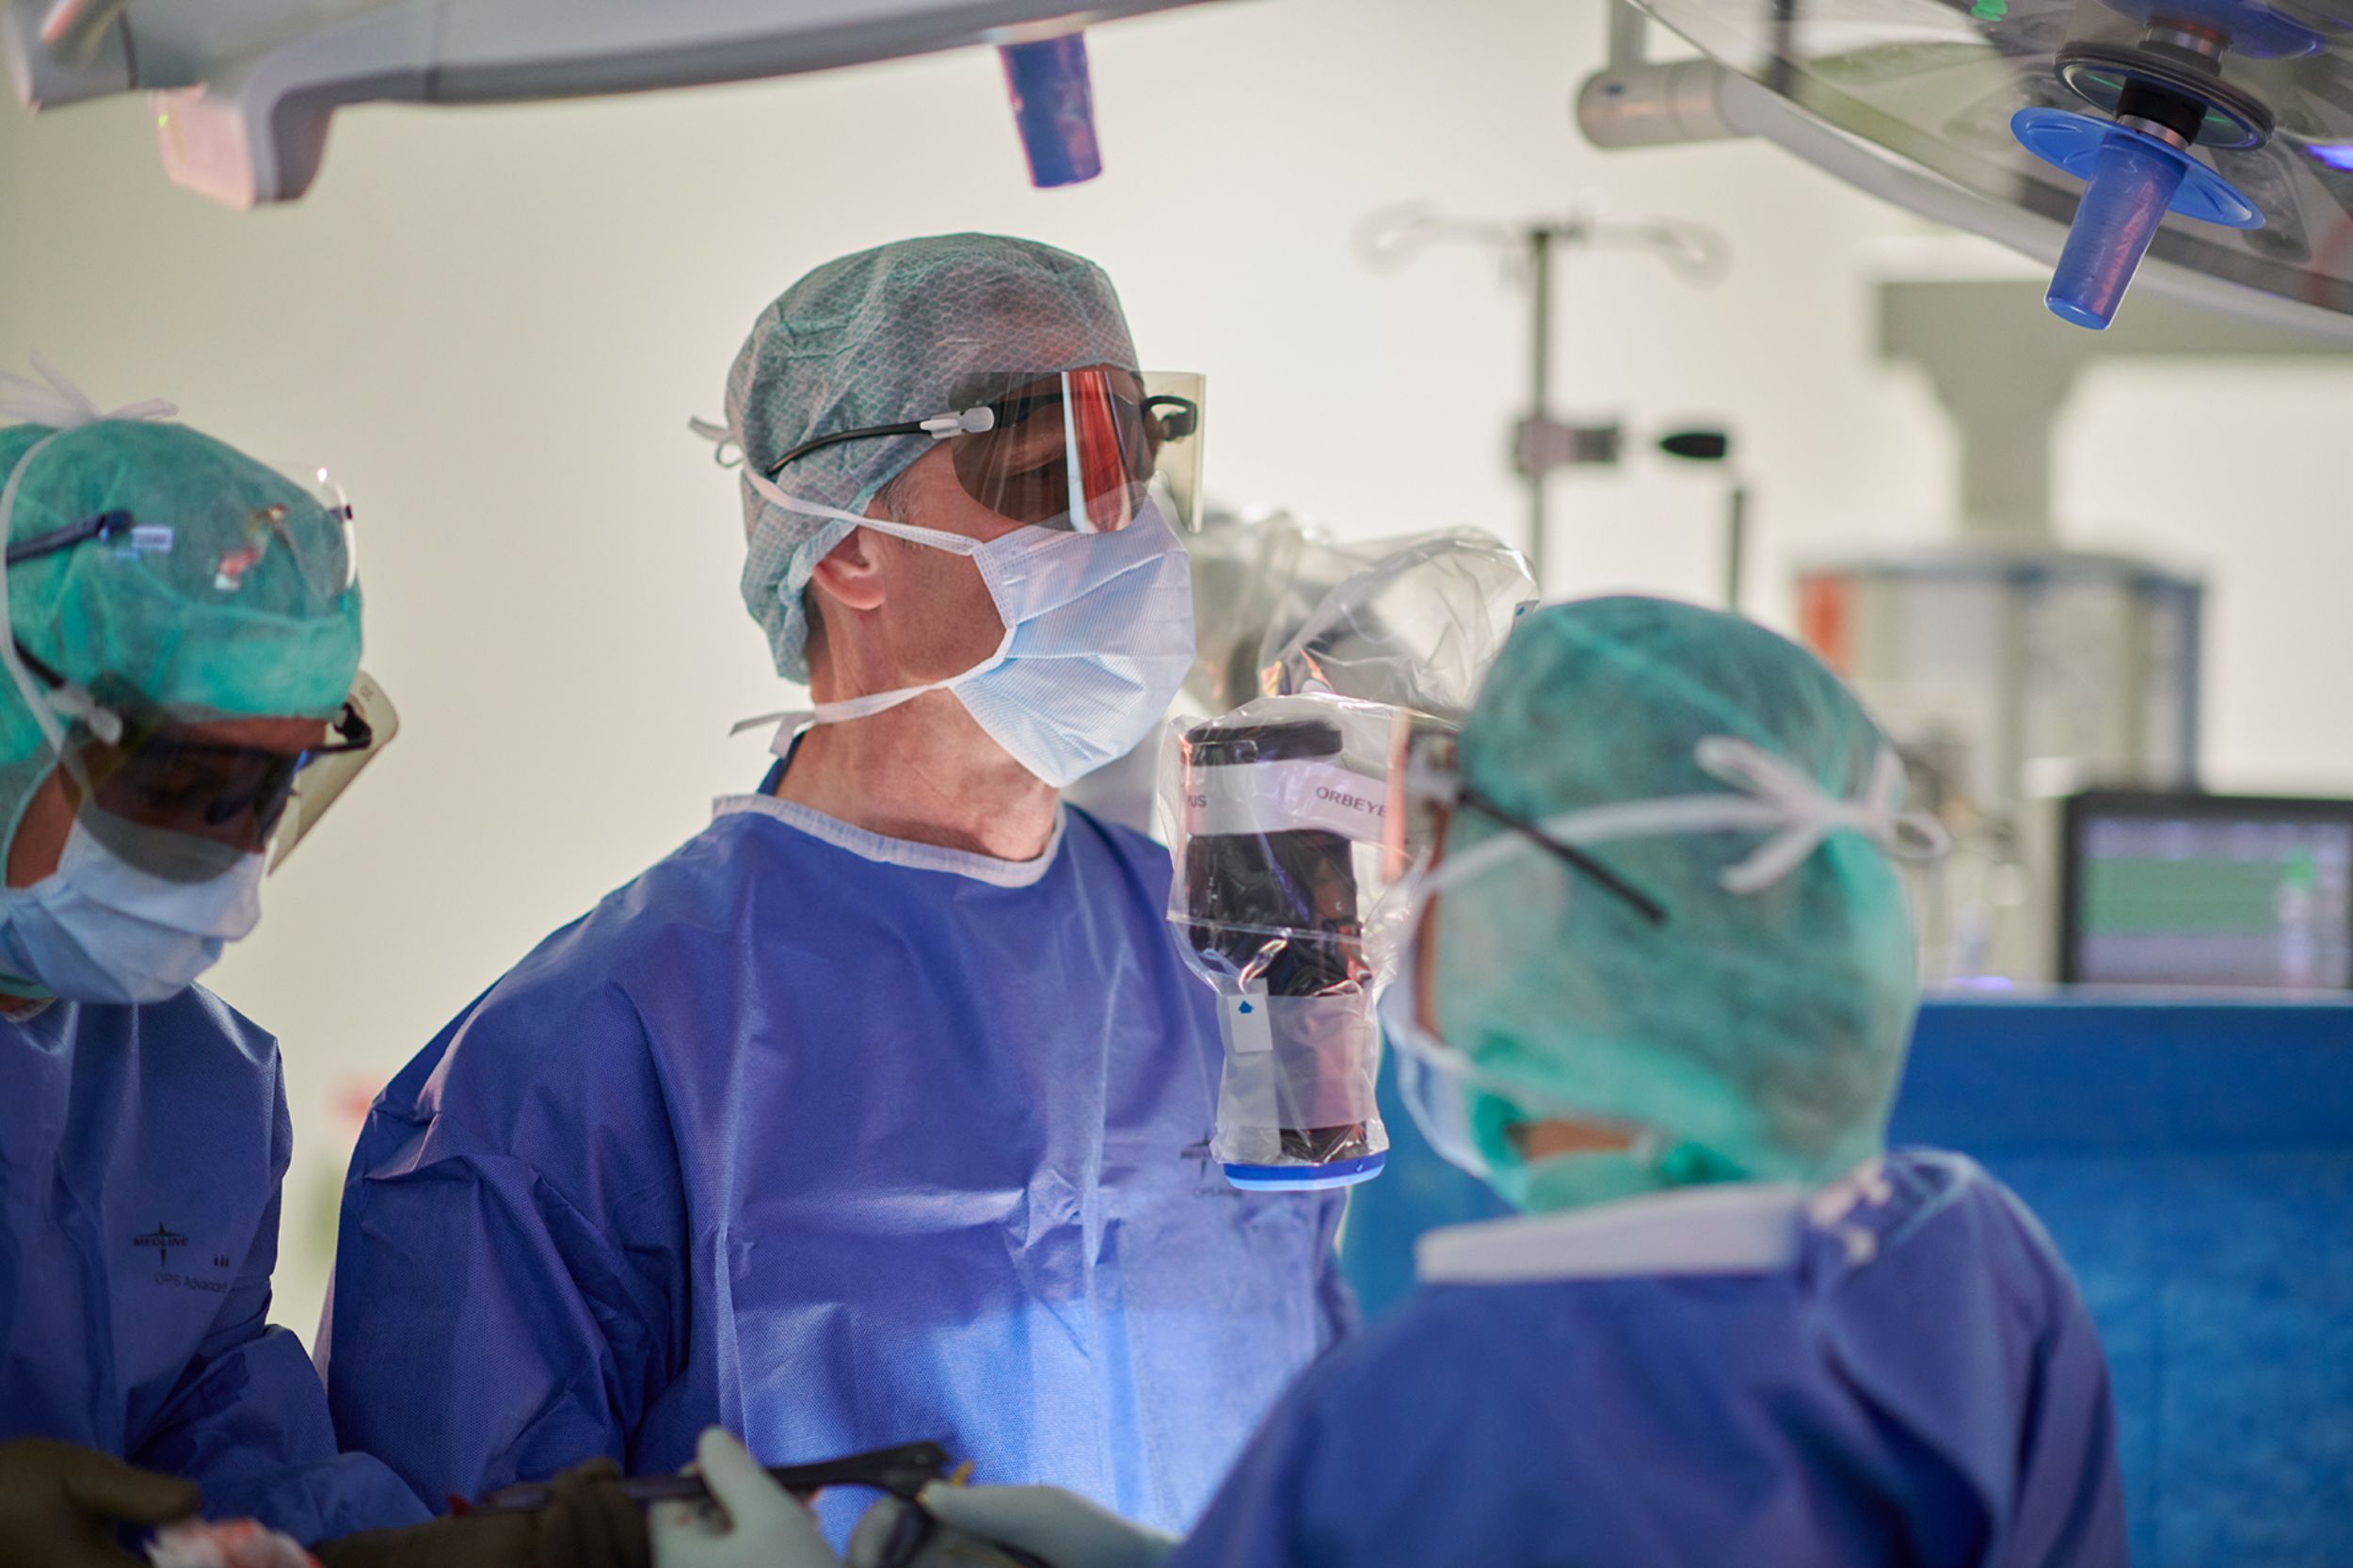 Prof. Stefan Schären in the operating room with 3D glasses